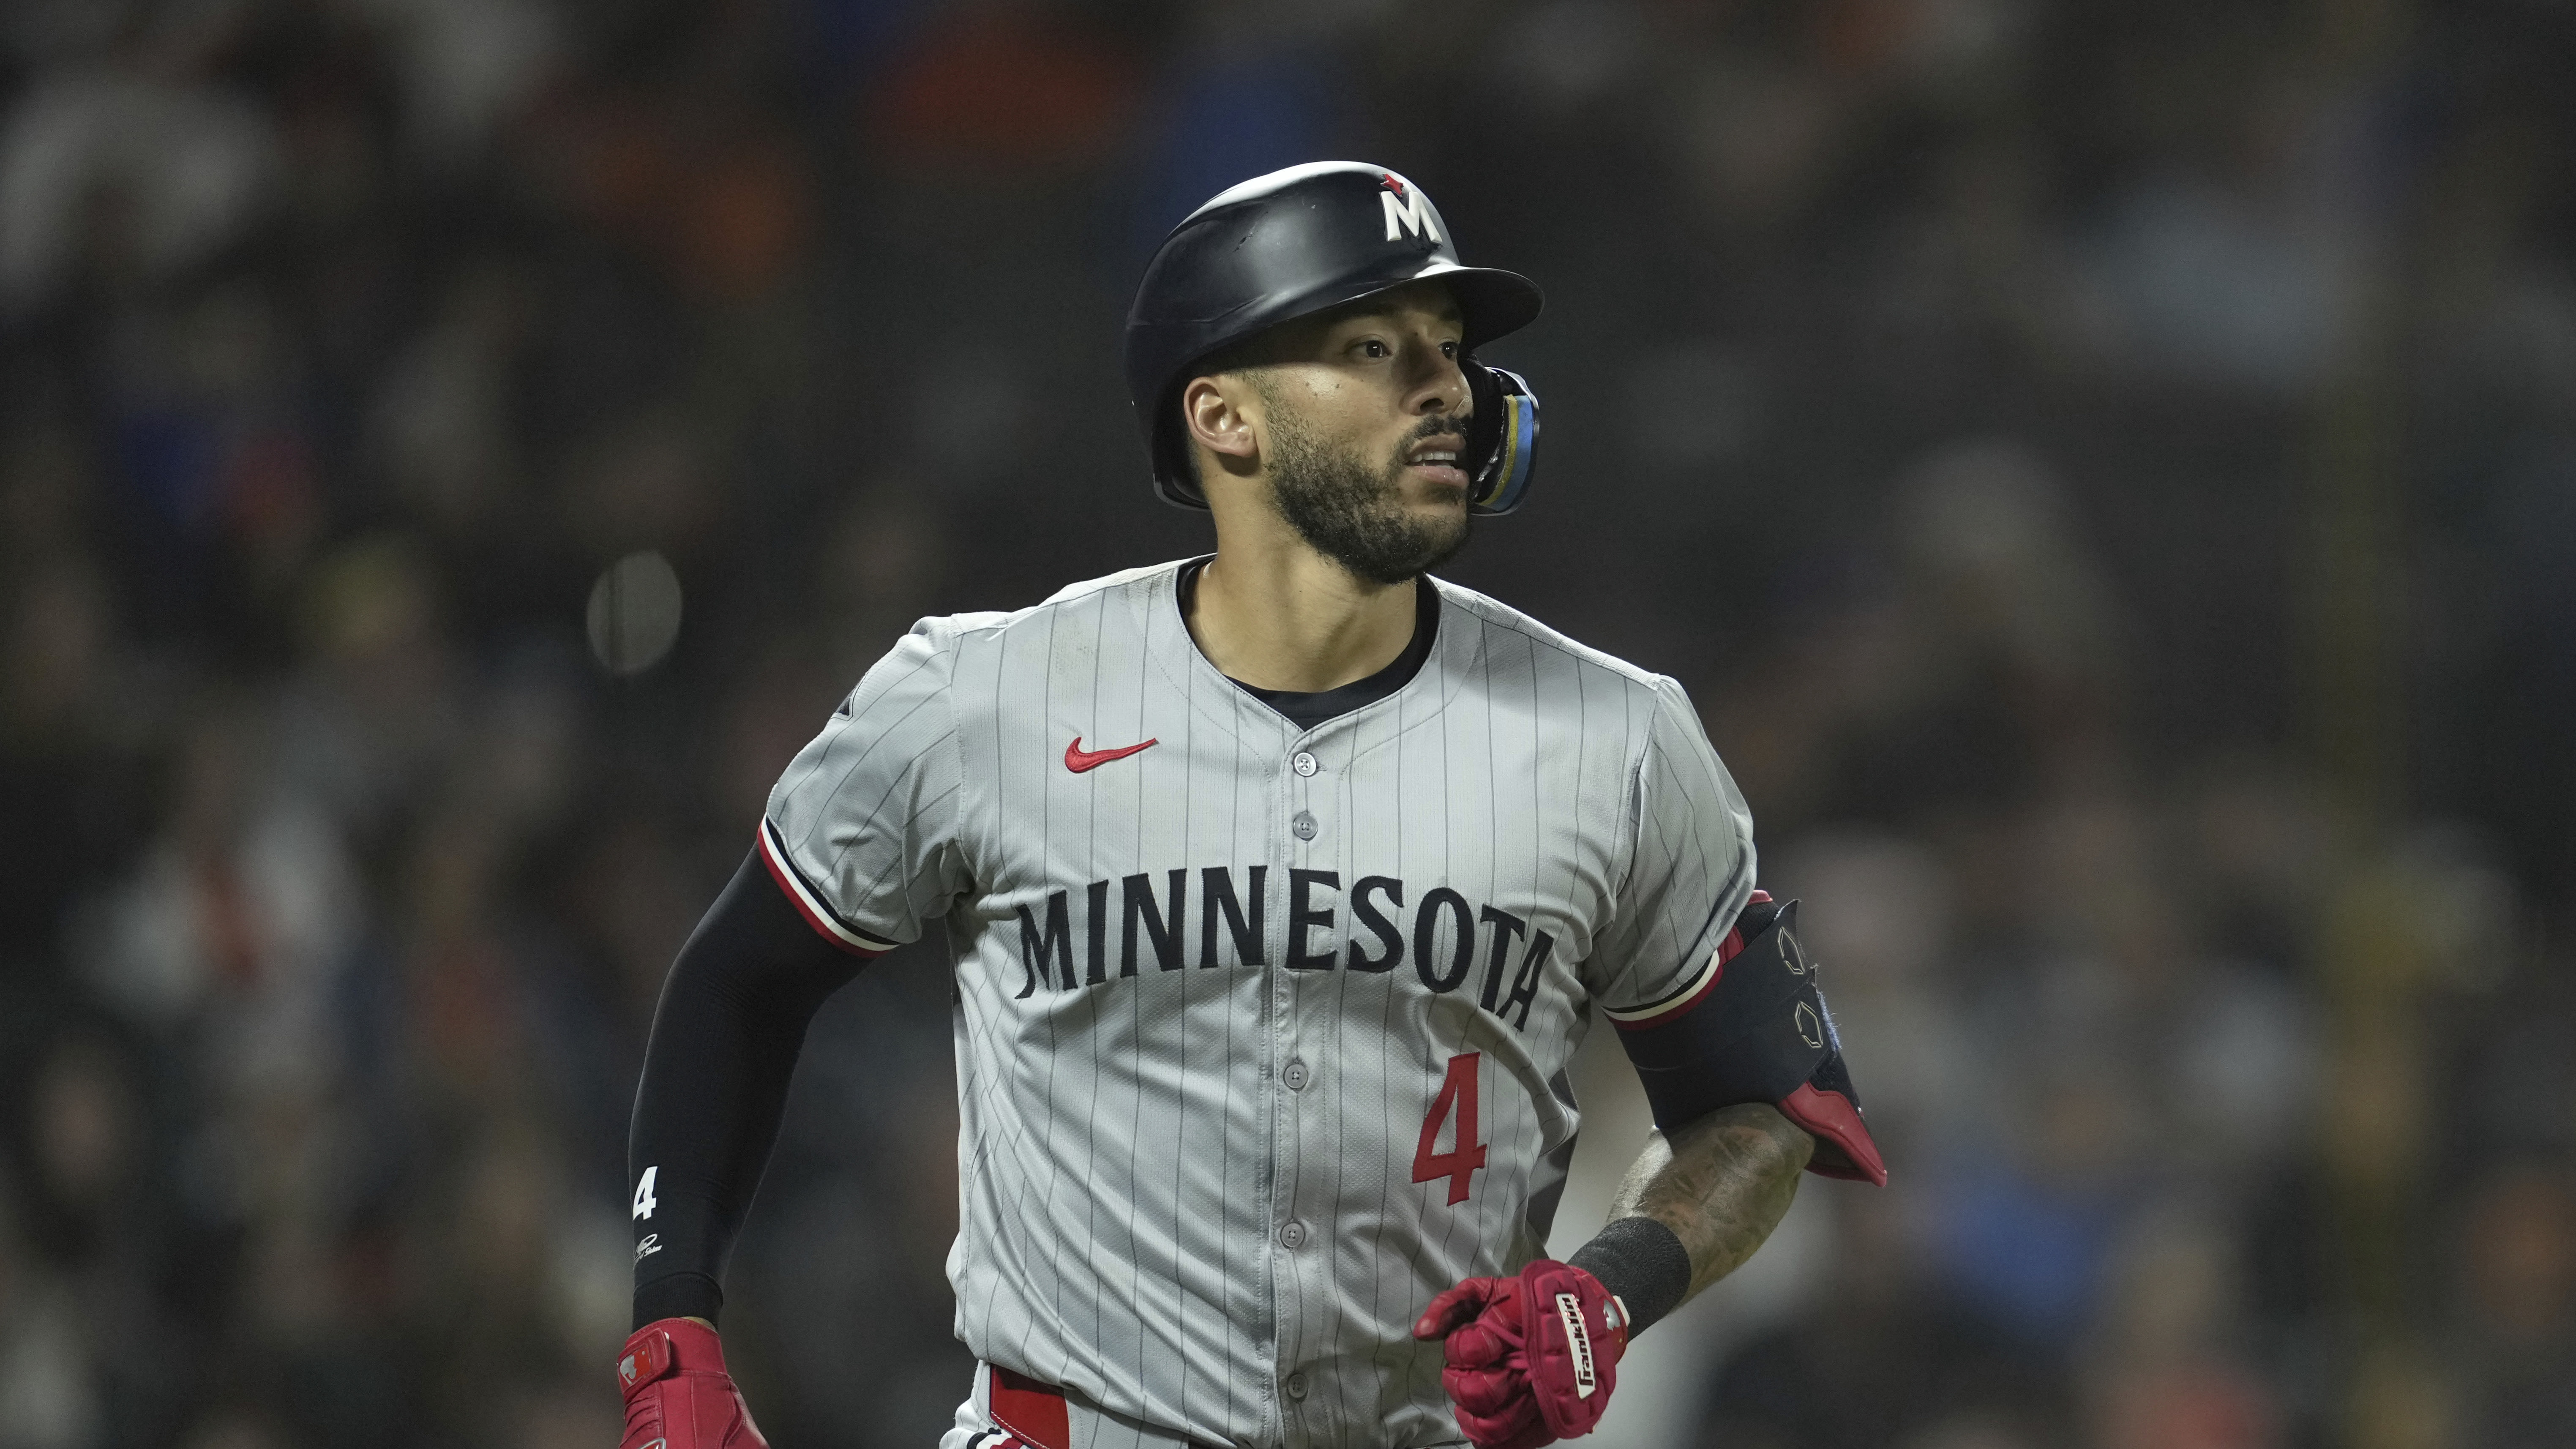 Twins shortstop Carlos Correa goes on 10-day IL with plantar fasciitis in his right foot